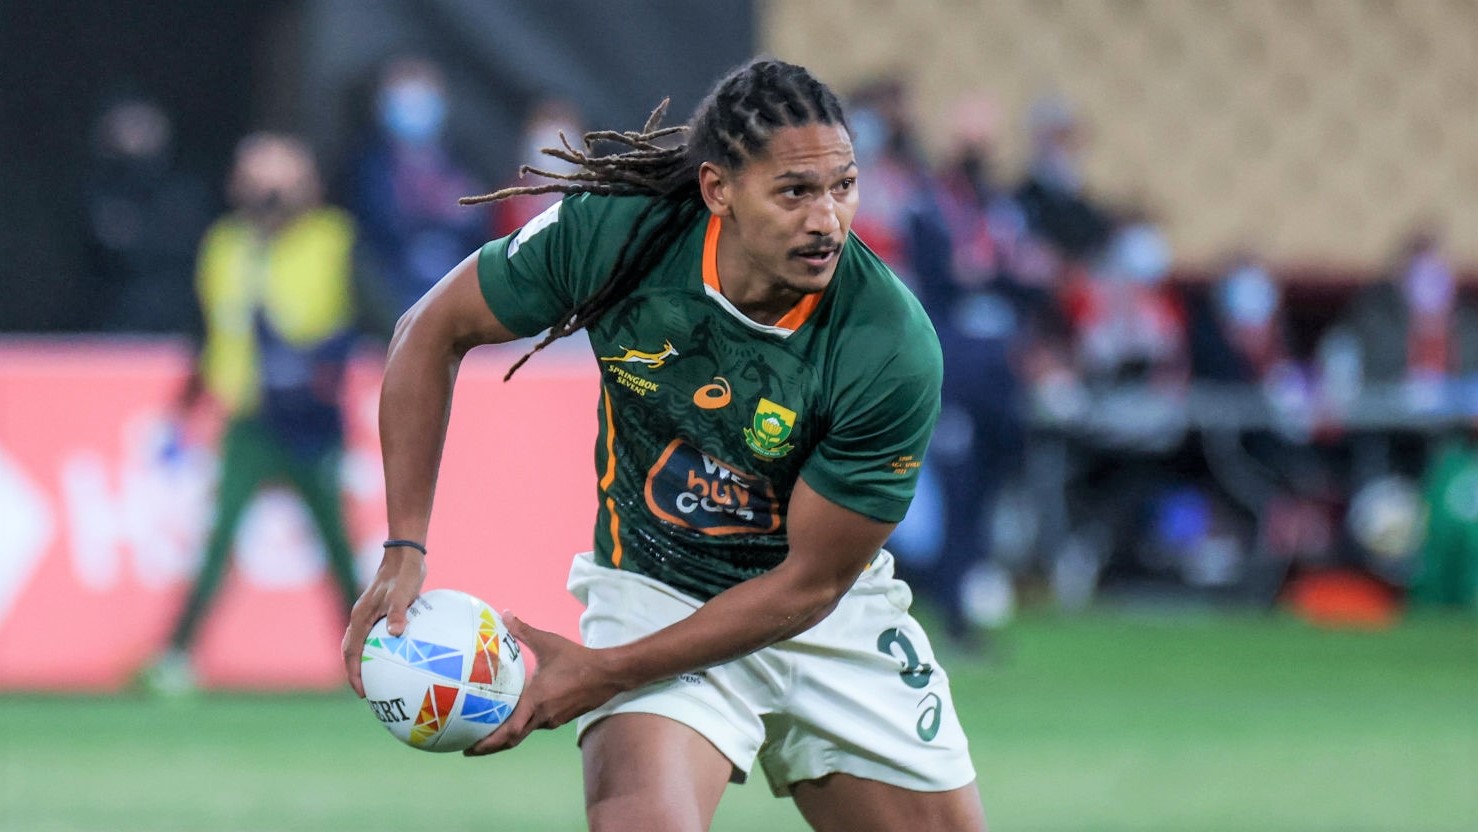 Justin Geduld of South Africa in action during the Men's HSBC World Rugby Sevens Series 2022 Final match between Australian and South Africa at the La Cartuja stadium in Seville, on January 30, 2022. (Photo by DAX Images/NurPhoto via Getty Images)